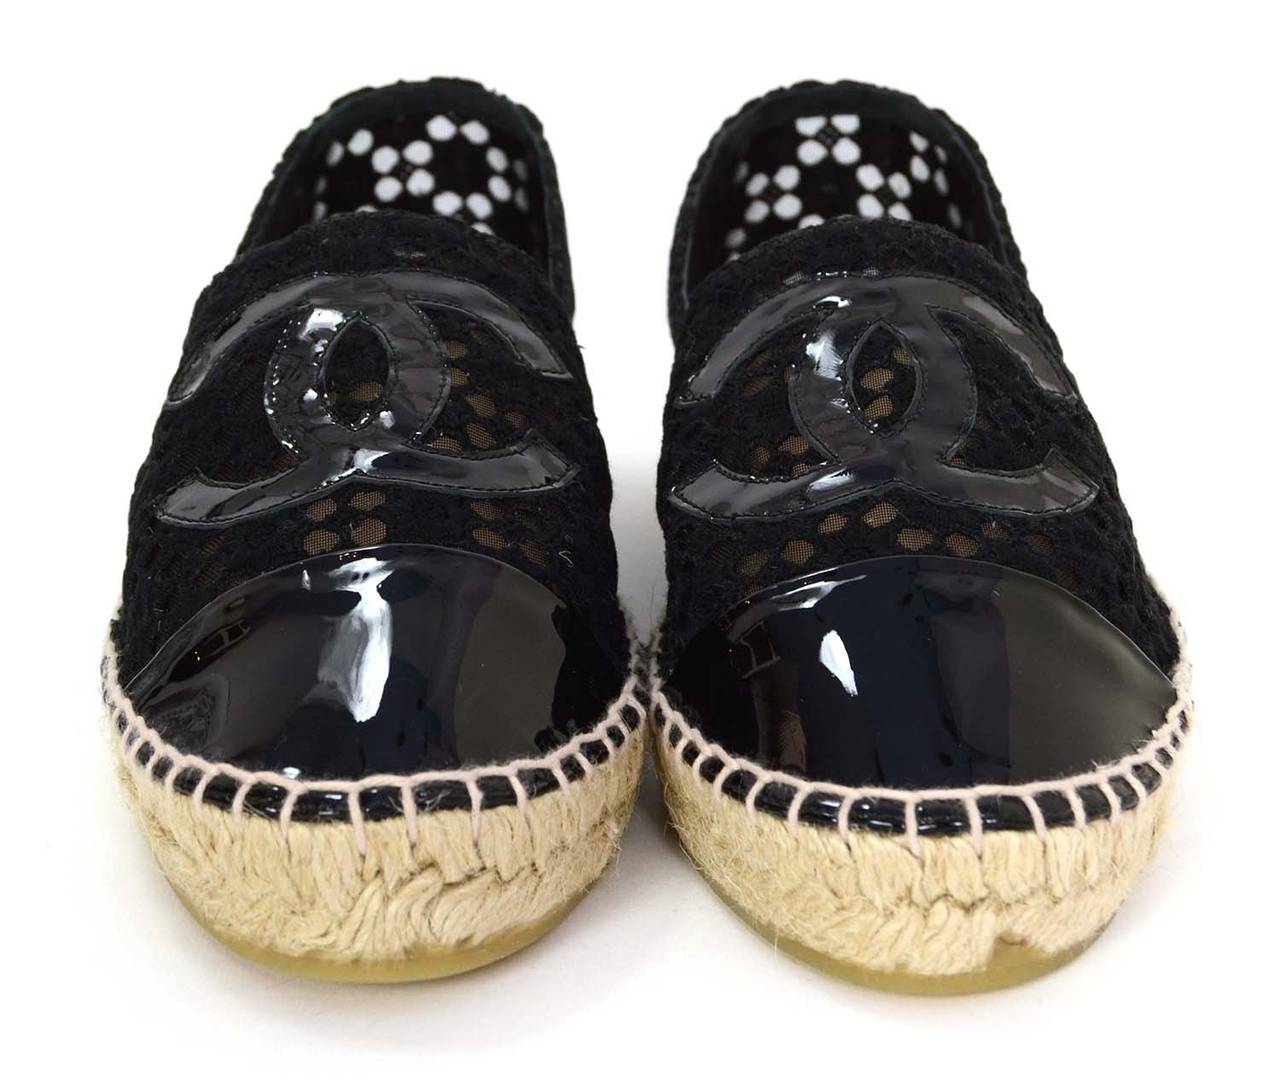 Chanel Black Mesh & Eyelet Espadrilles
Features patent toe cap and CC at front of shoe
Made in: Spain
Color: Black and beige
Composition: Mesh, eyelet, patent and jute rope
Sole Stamp: 39 Made in Spain CHANEl CC
Closure/opening: Slide